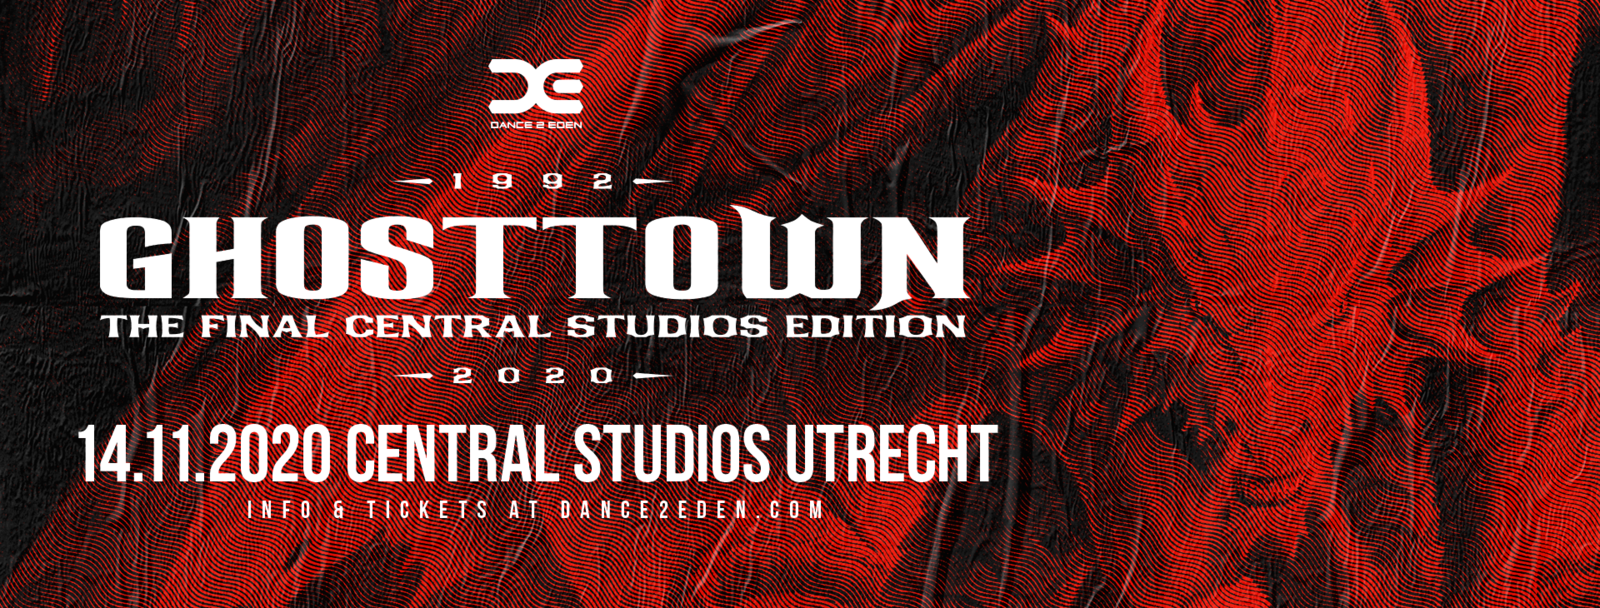 Ghosttown – The Final Central Studios Edition